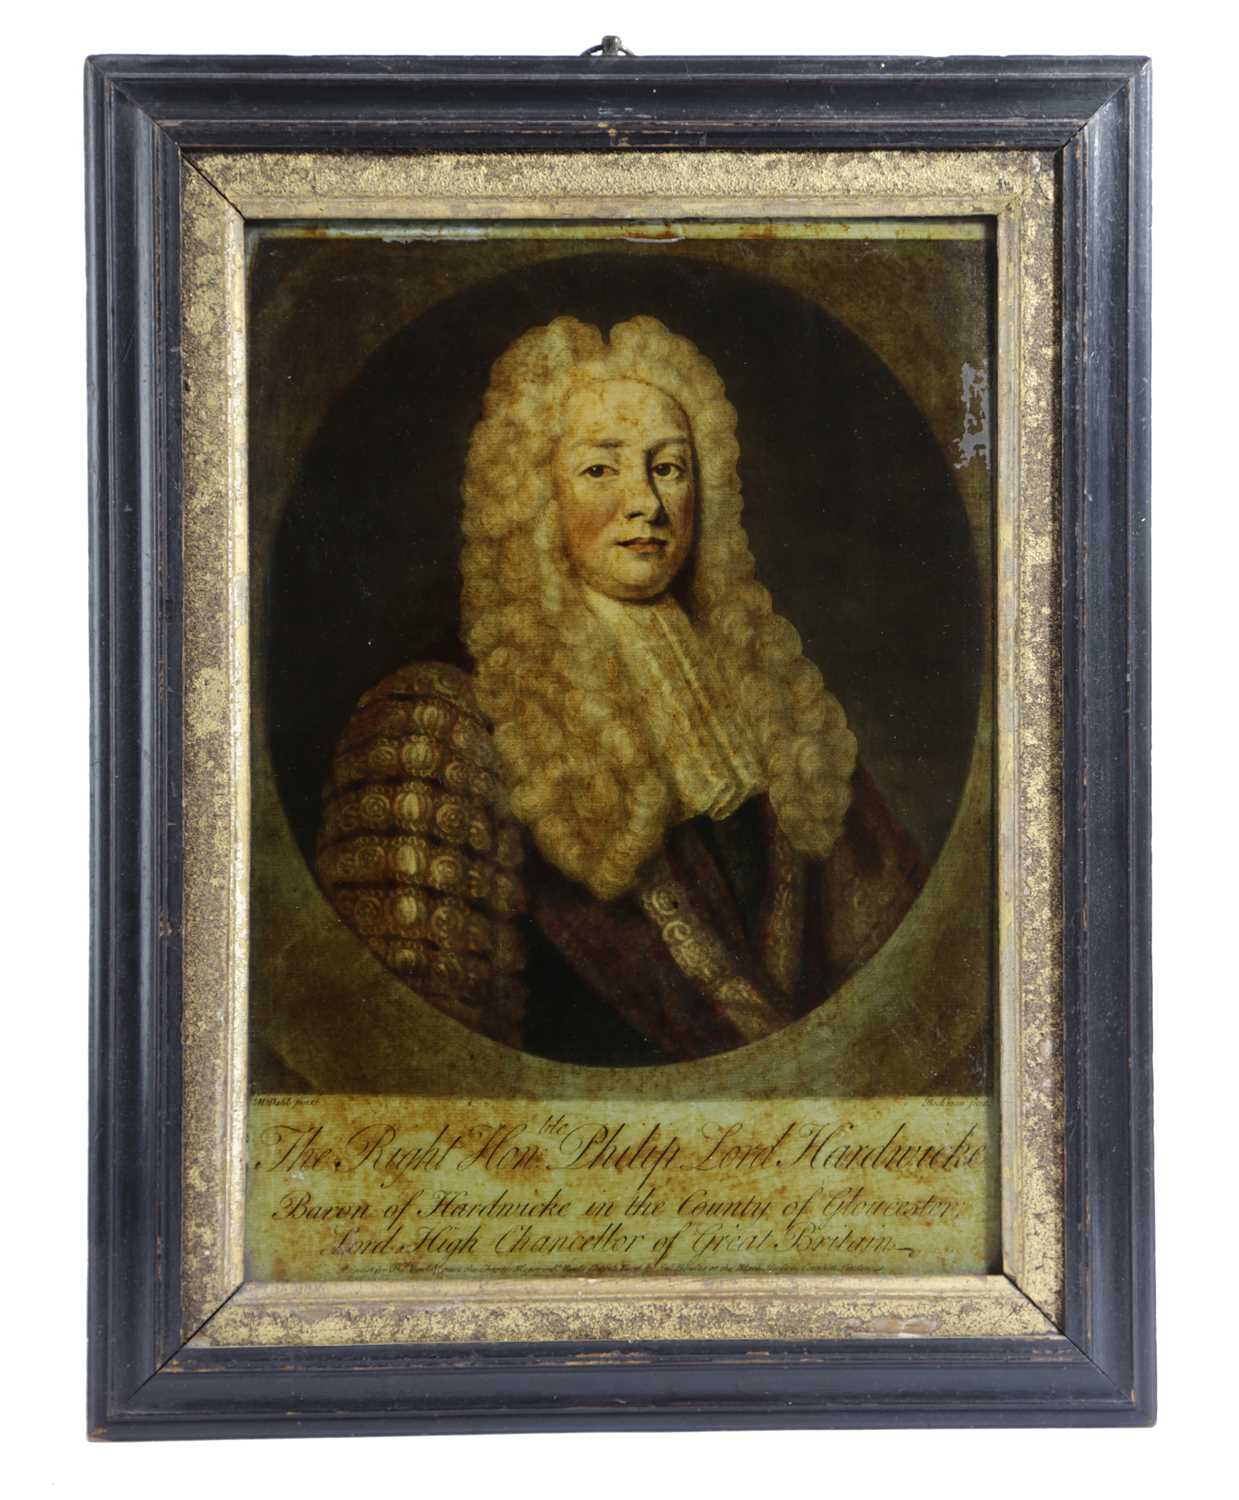 A PAIR OF REVERSE GLASS PORTRAITS LATE 18TH CENTURY of 'The Right Hon.ble Philip Lord Hardwicke' and